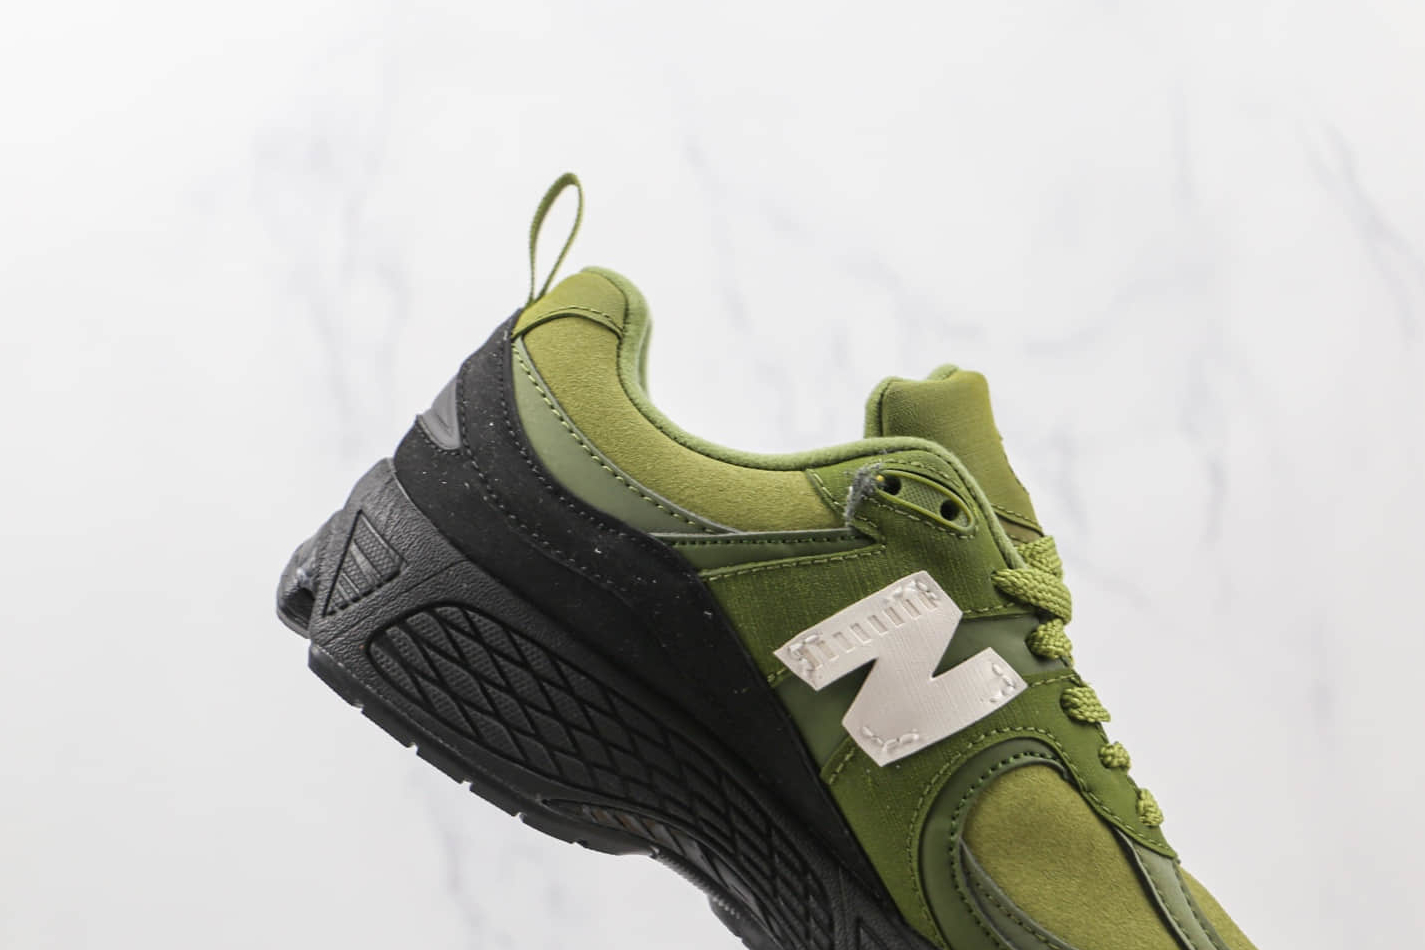 New Balance Basement x 2002R 'Moss Green' - Stylish and Exclusive Limited Edition